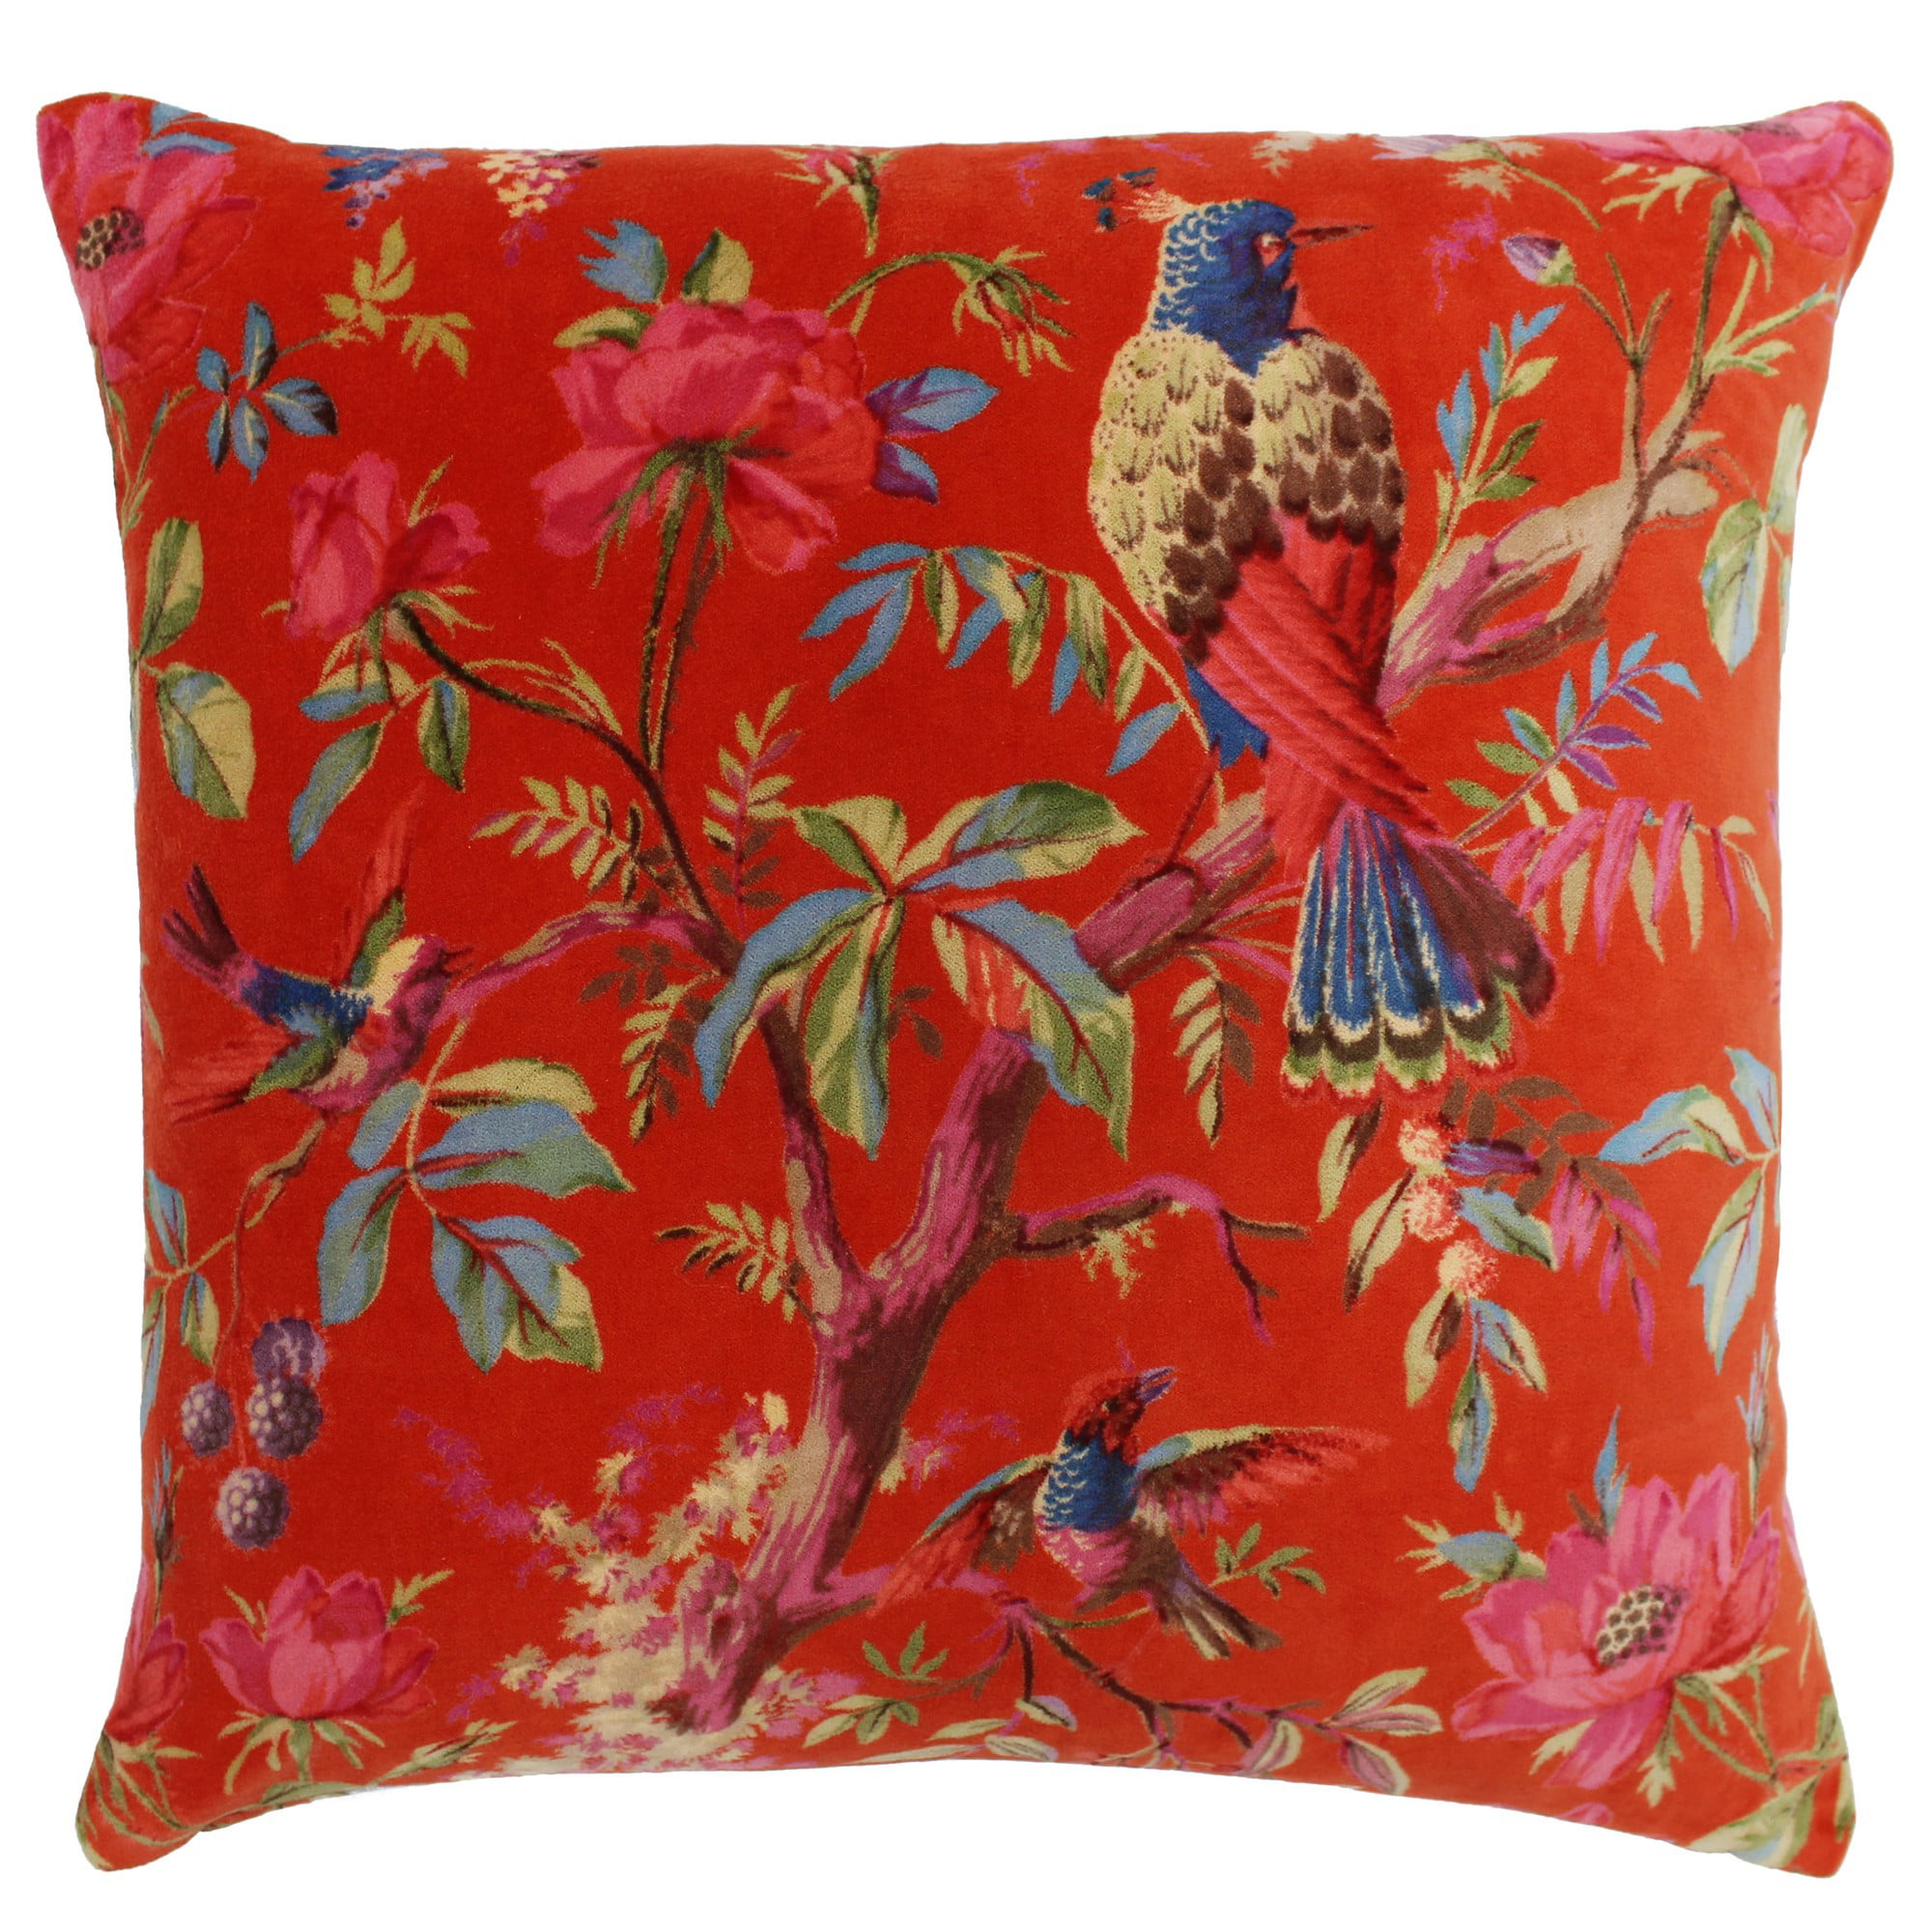 Tropical Cushion Covers Hanging Garden Floral Cushions Cover 20" x 20" Paoletti